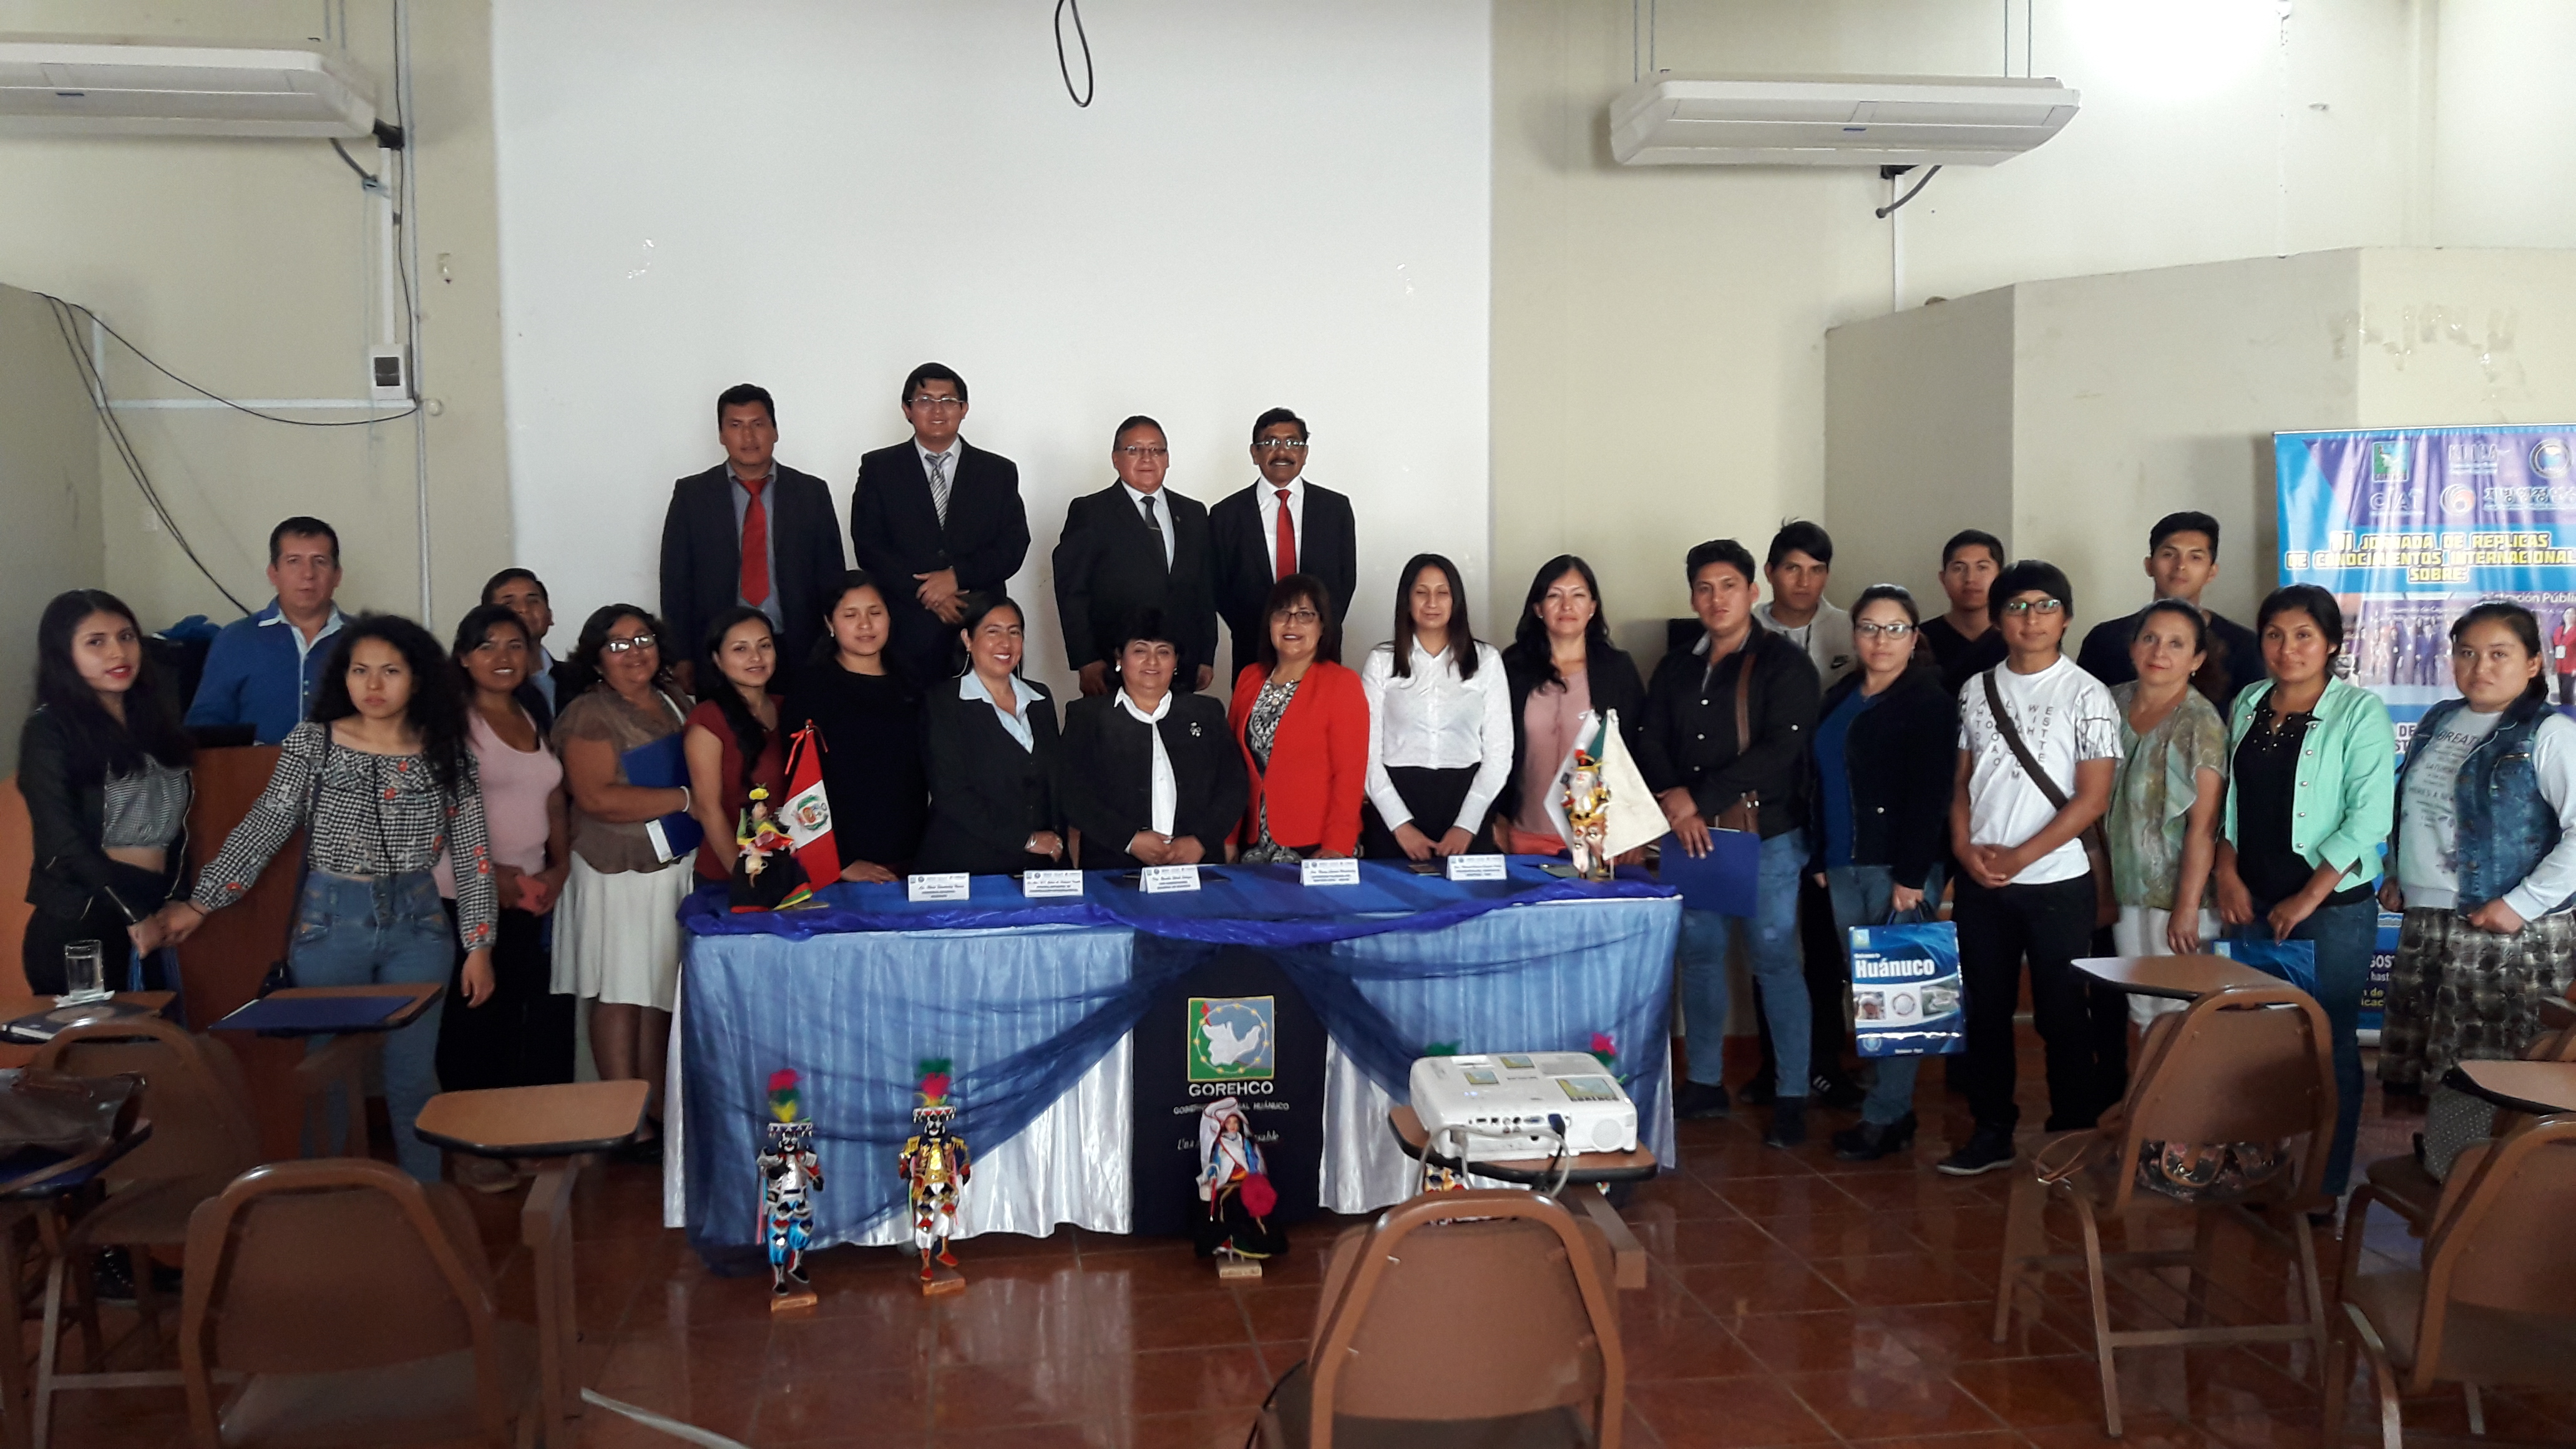 Huanuco carries out second workshop to share experience with LOGODI 큰 이미지[마우스 클릭 시 창닫기]